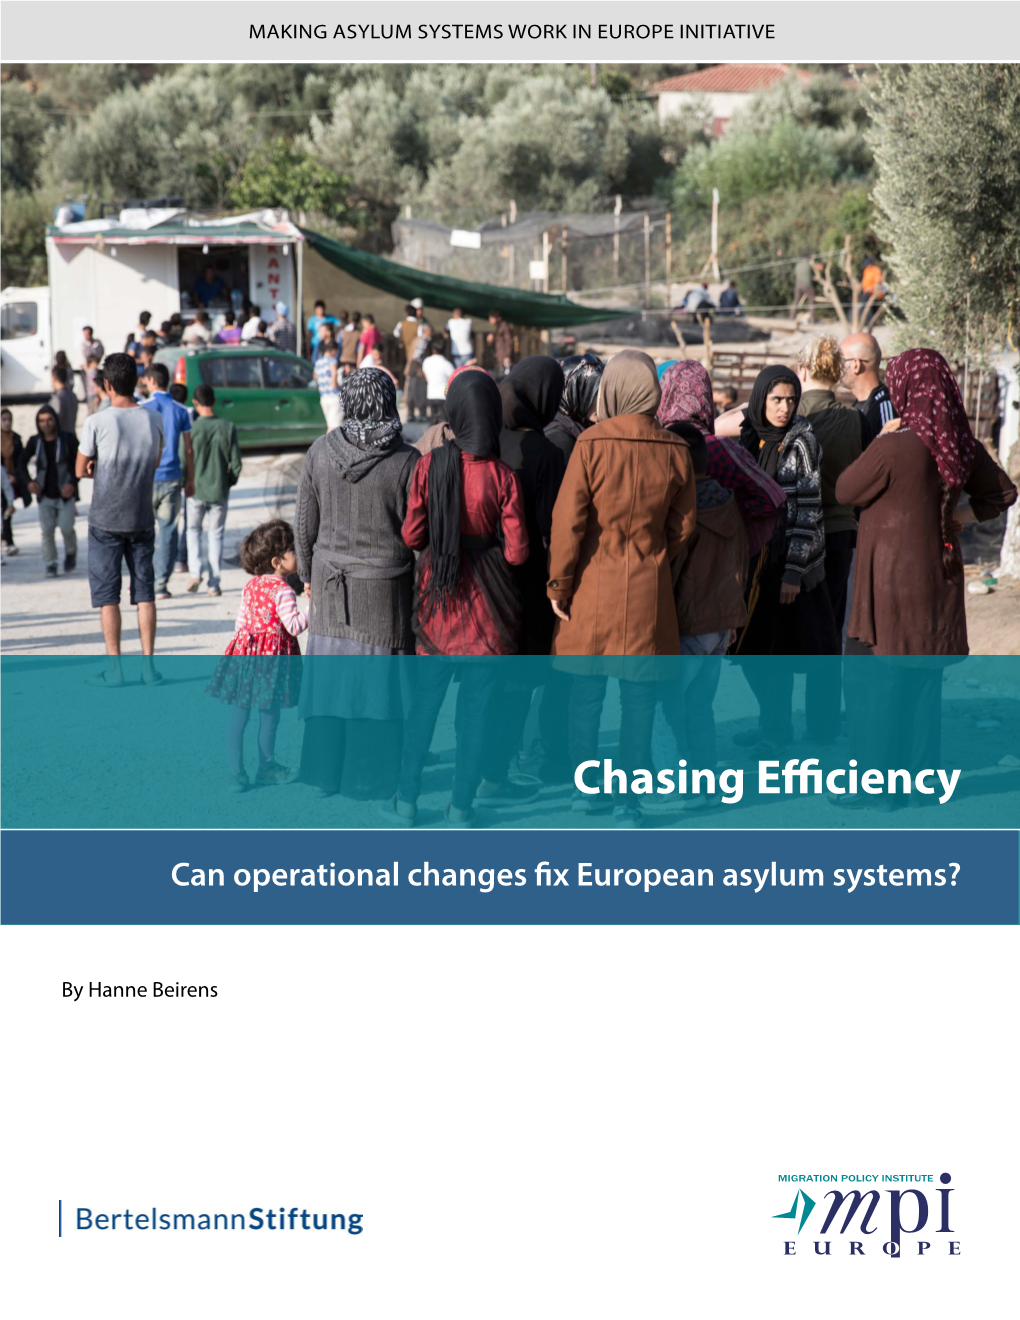 Chasing Efficiency: Can Operational Changes Fix European Asylum Systems? Chasing Efficiency: Can Operational Changes Fix European Asylum Systems?